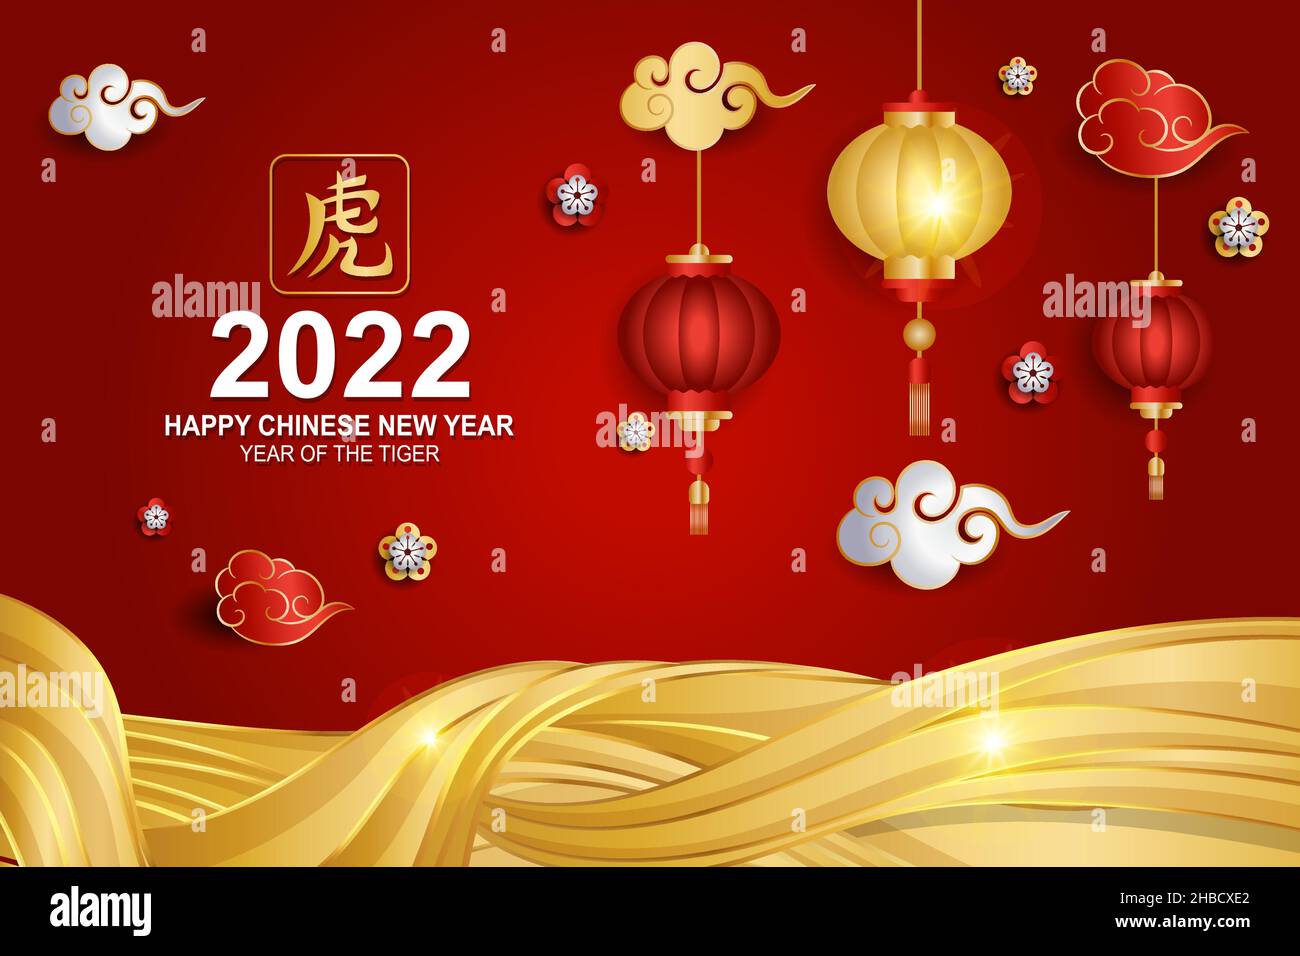 Happy Chinese new year 2022, year of the tiger with lantern and cloud decoration Stock Vector